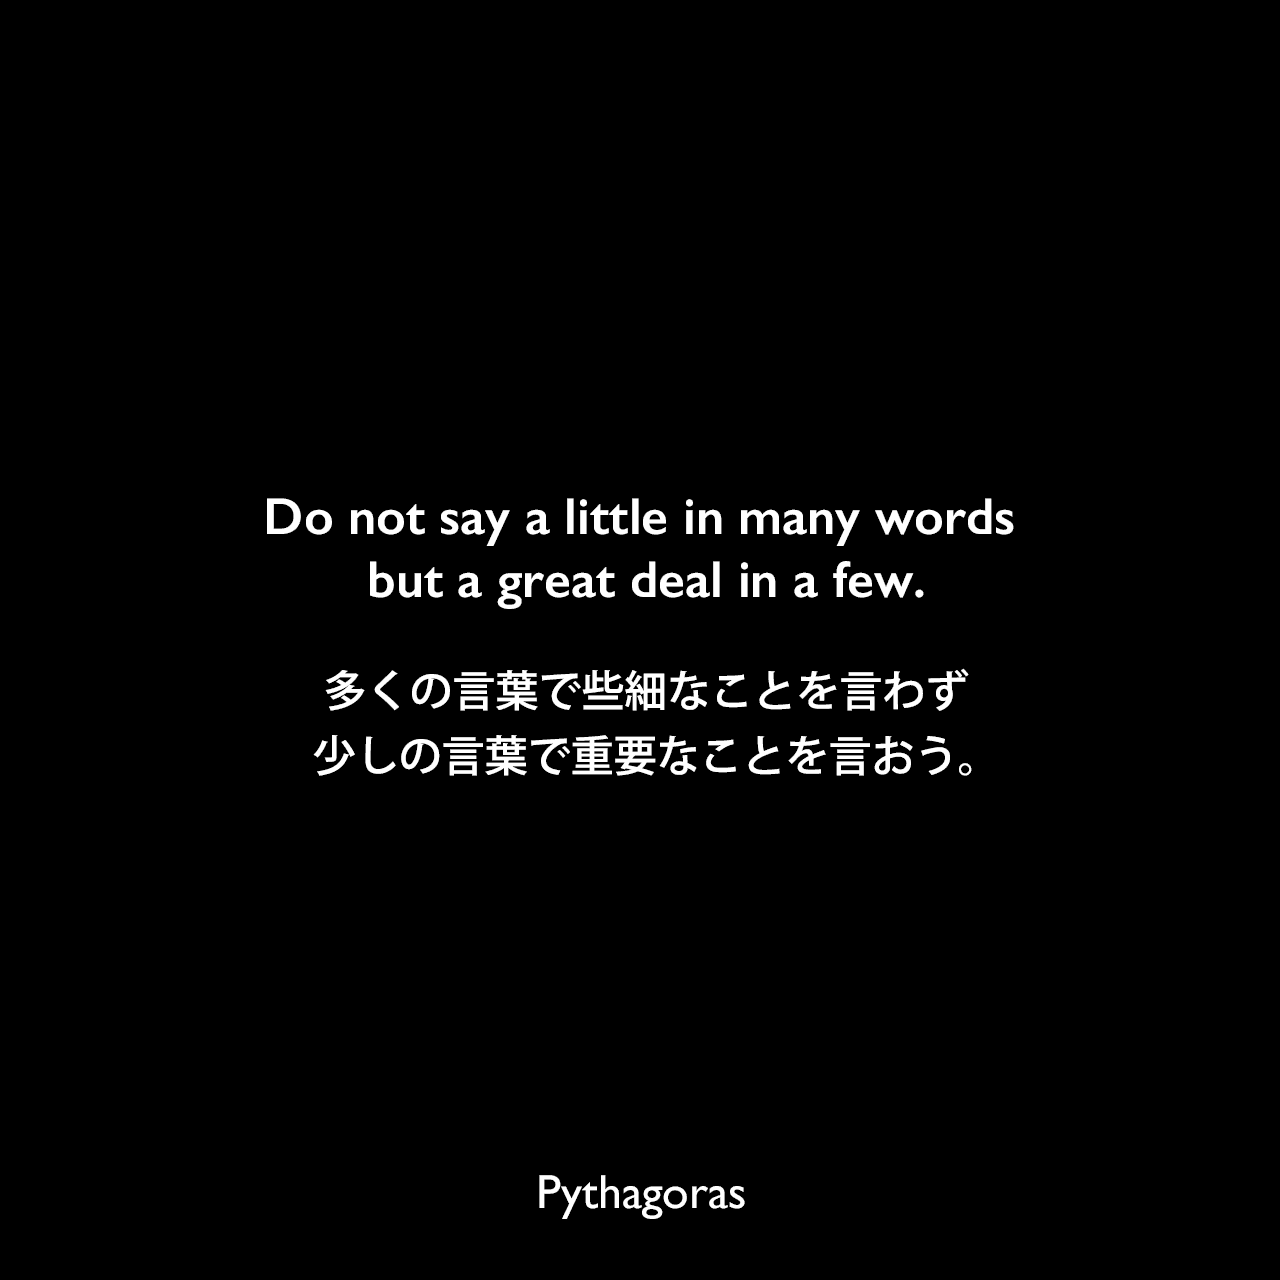 Do not say a little in many words but a great deal in a few.多くの言葉で些細なことを言わず、少しの言葉で重要なことを言おう。- Tyron Edwardsの本「A Dictionary of Thoughts」よりPythagoras